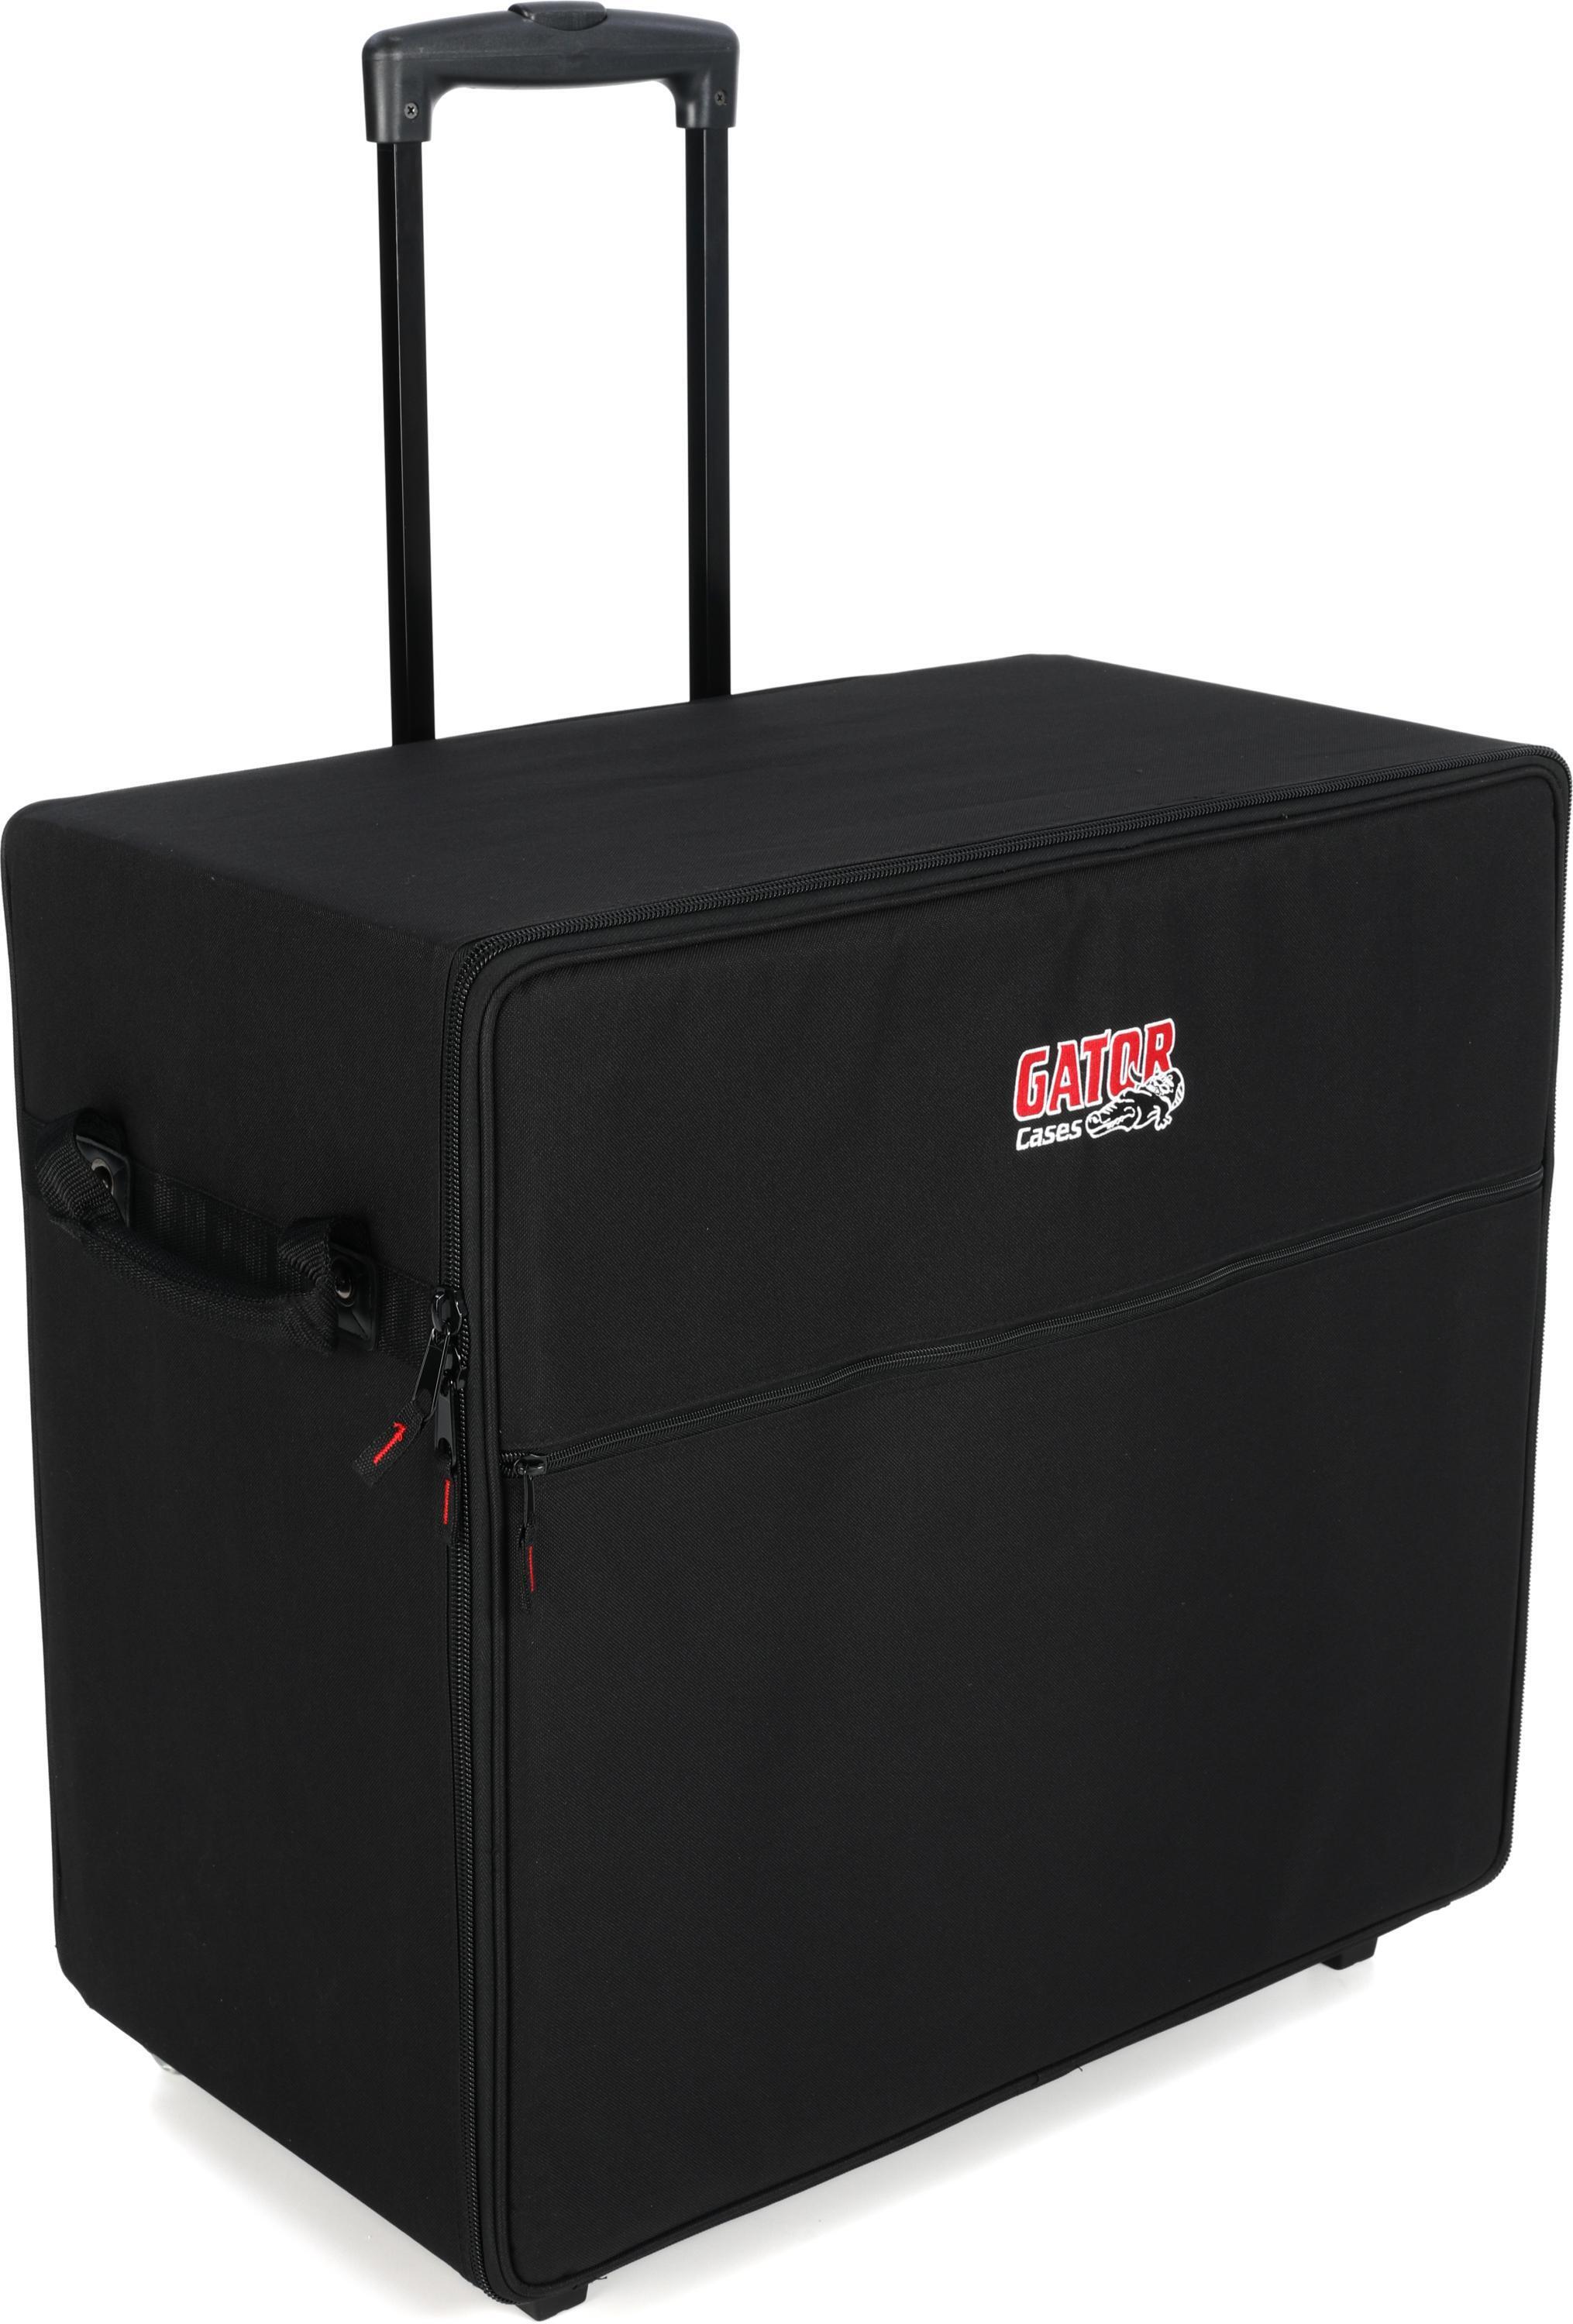 Bose L1 Pro16 System Roller Bag | Sweetwater